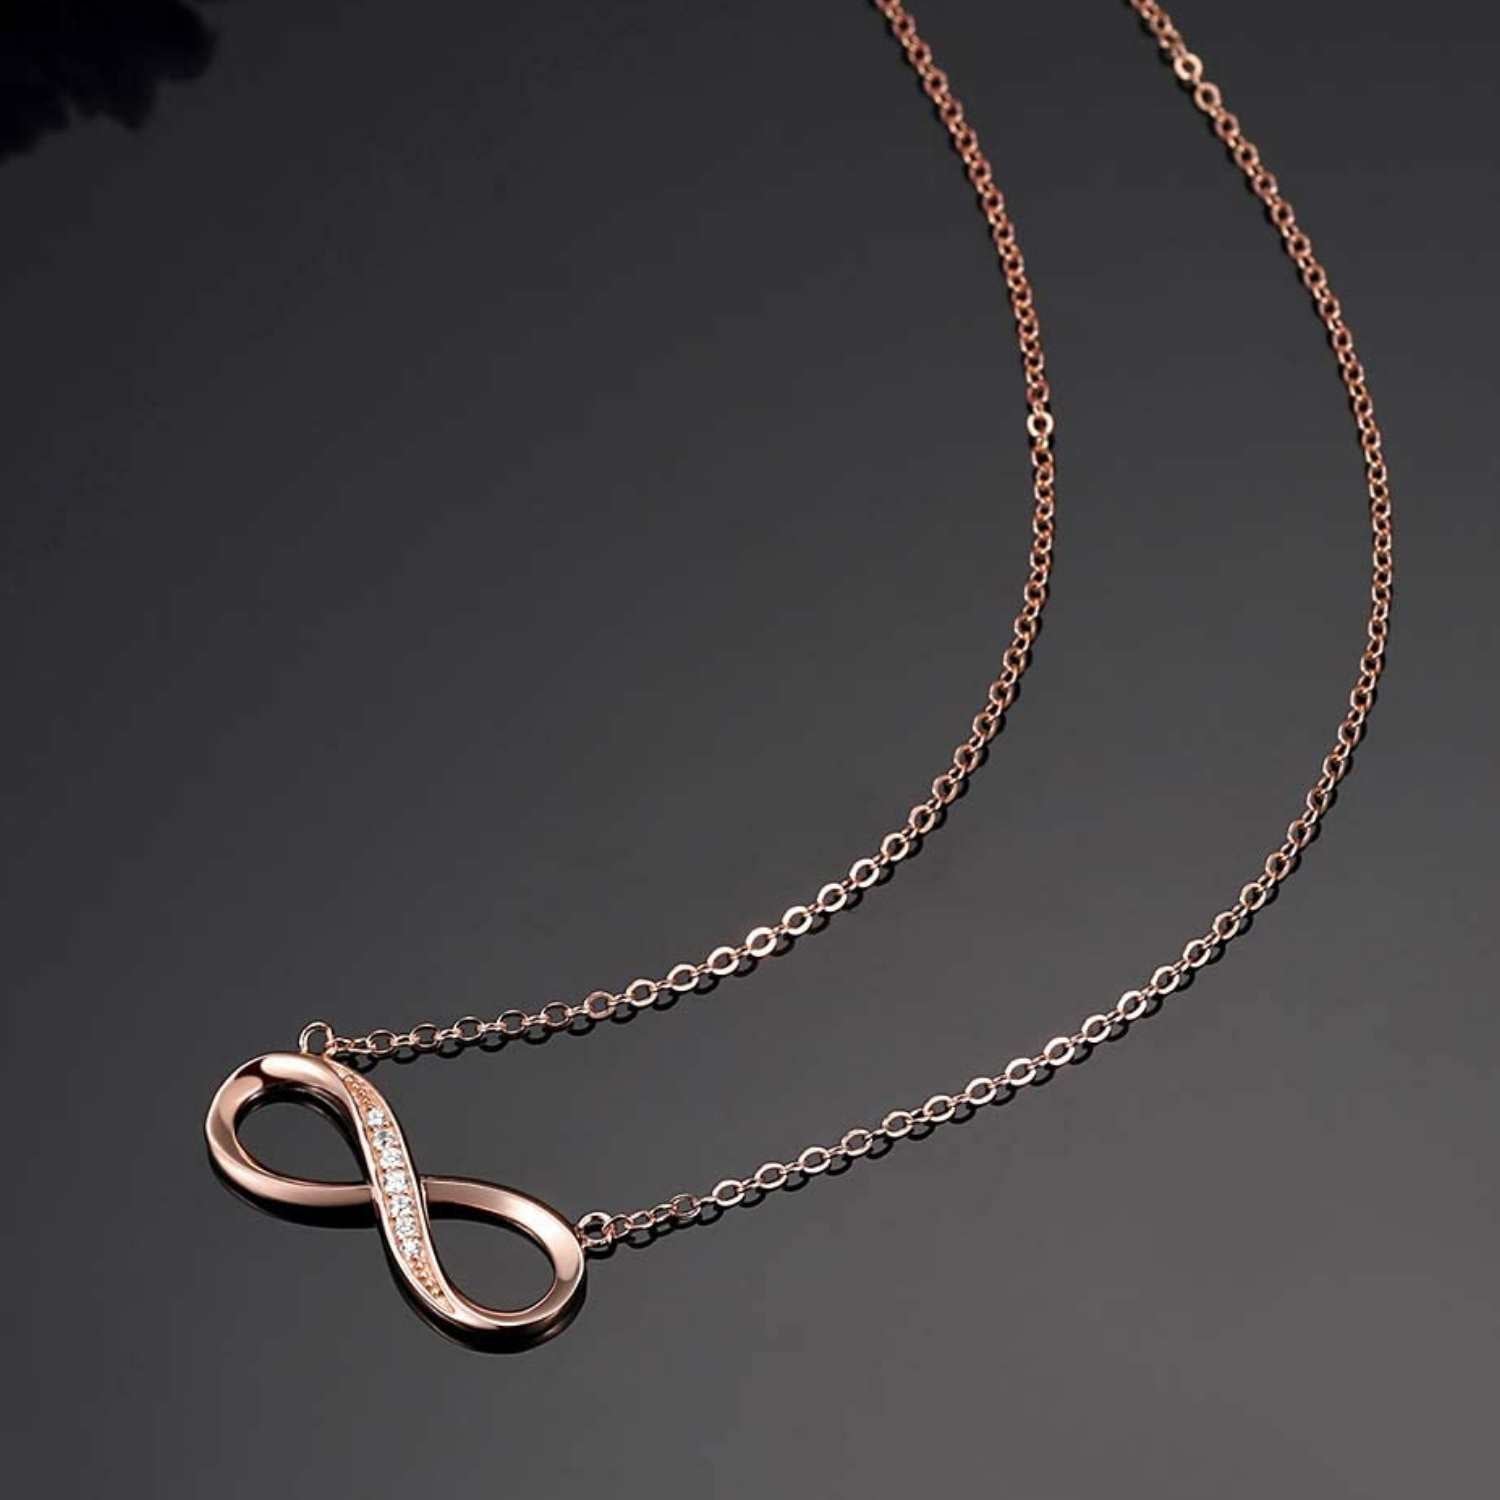 Infinity Pendant in 92.5 Silver - 18k Rose Gold finish studded with Swiss Zirconia